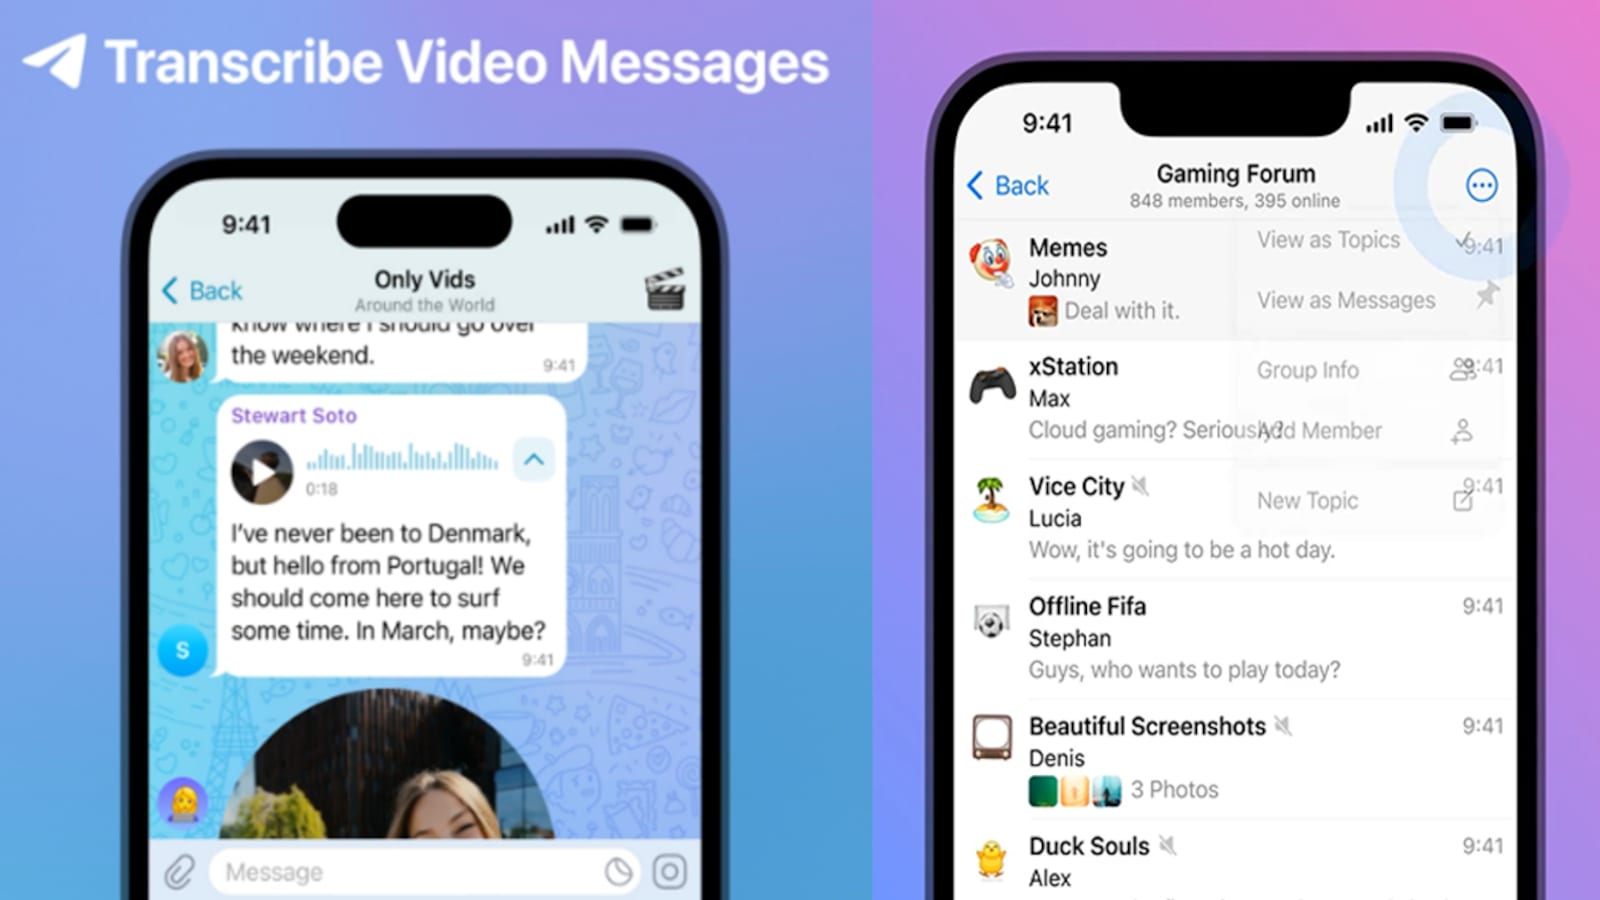 Telegram launches video transcription and accuses Apple of delaying the most recent upgrade